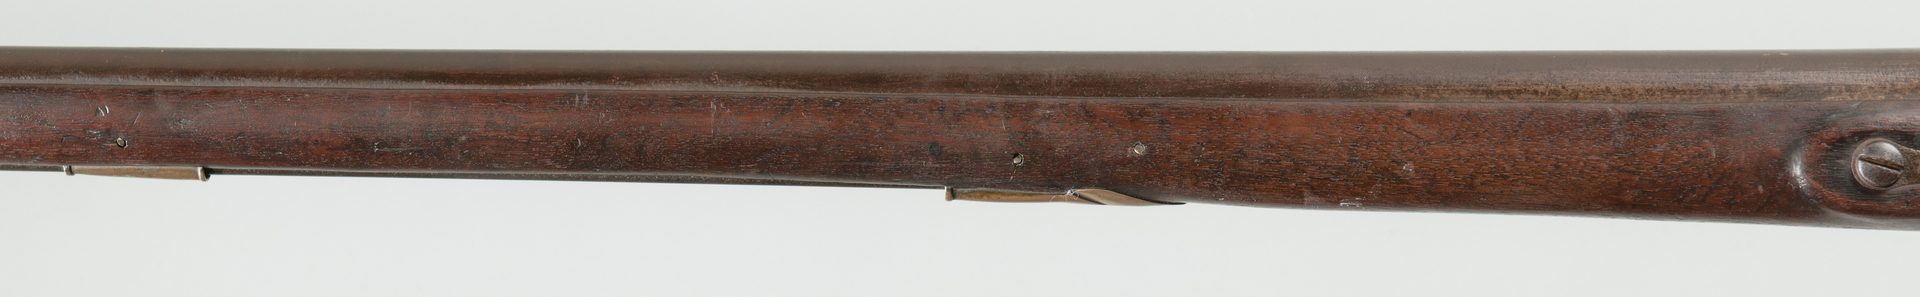 Lot 241: Whitney model 1816 contract, conversion rifle